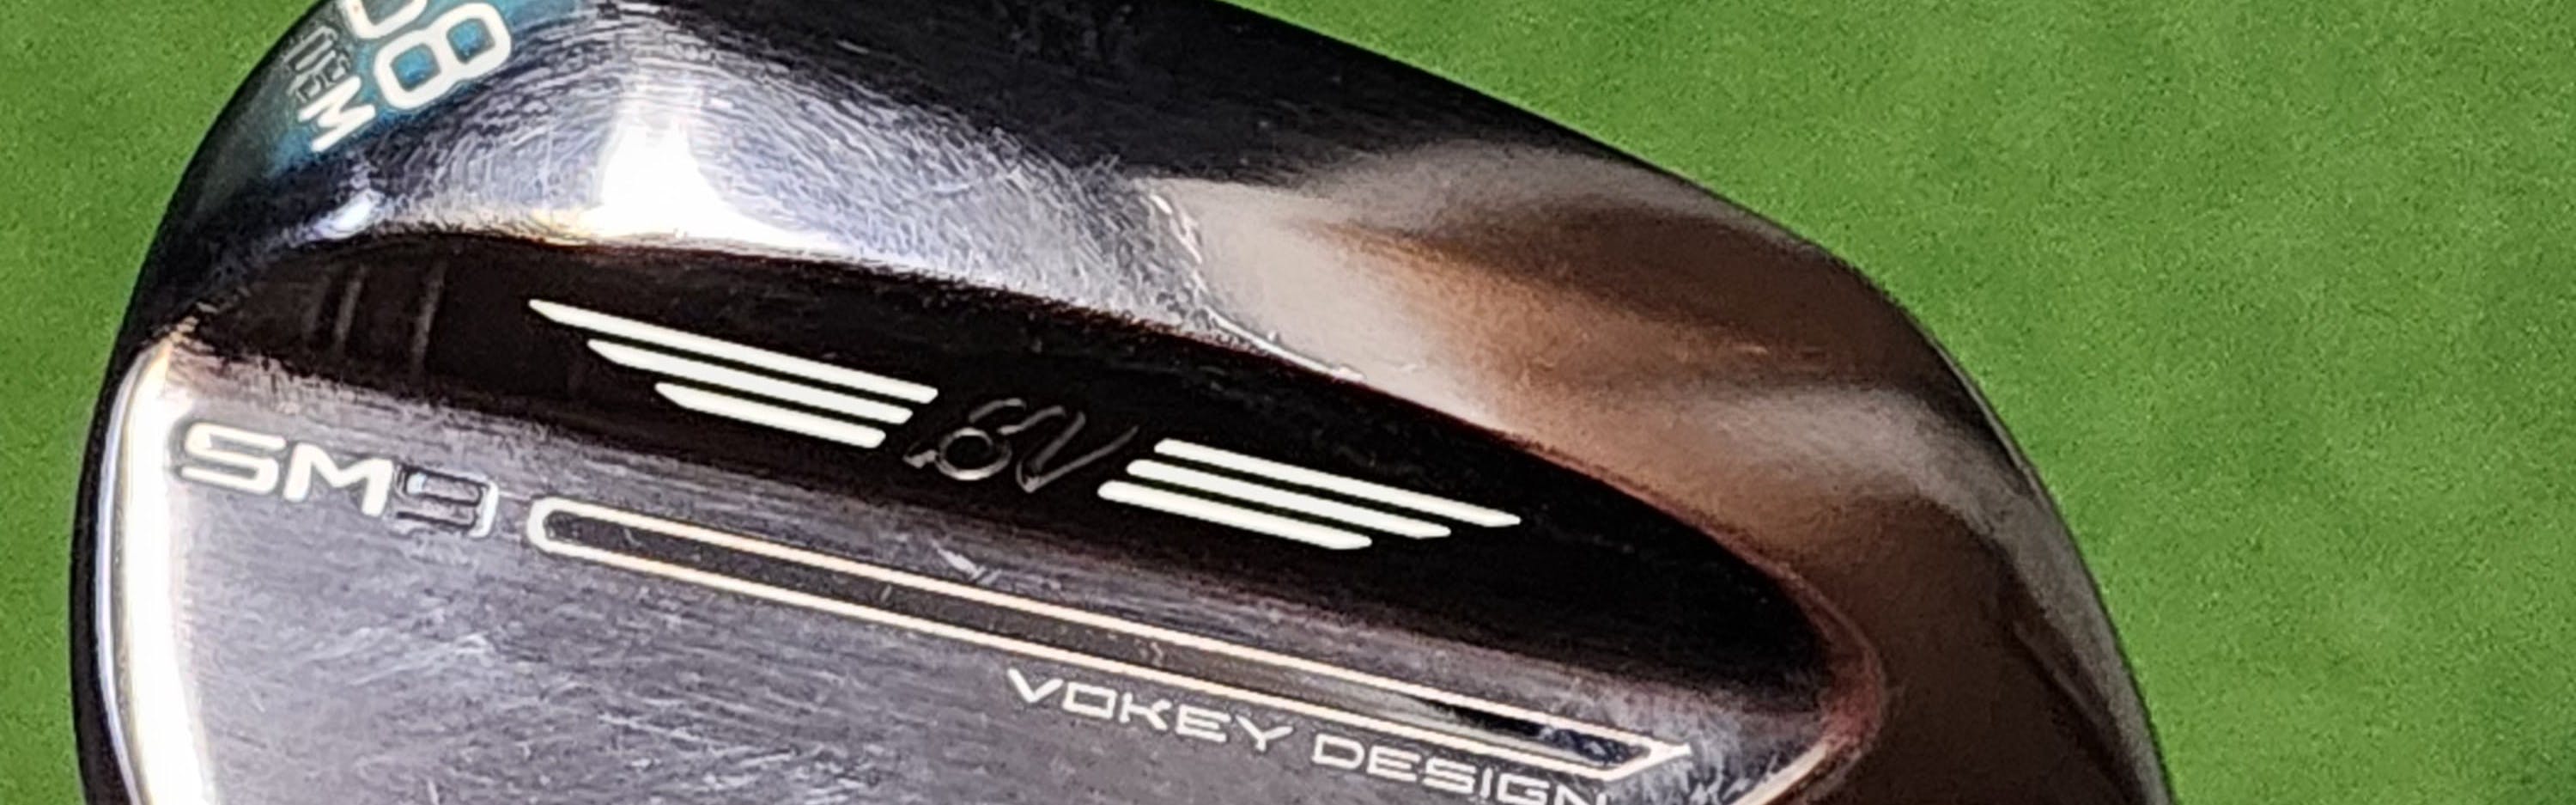 The Titleist Vokey SM9 Brushed Steel Wedge. 